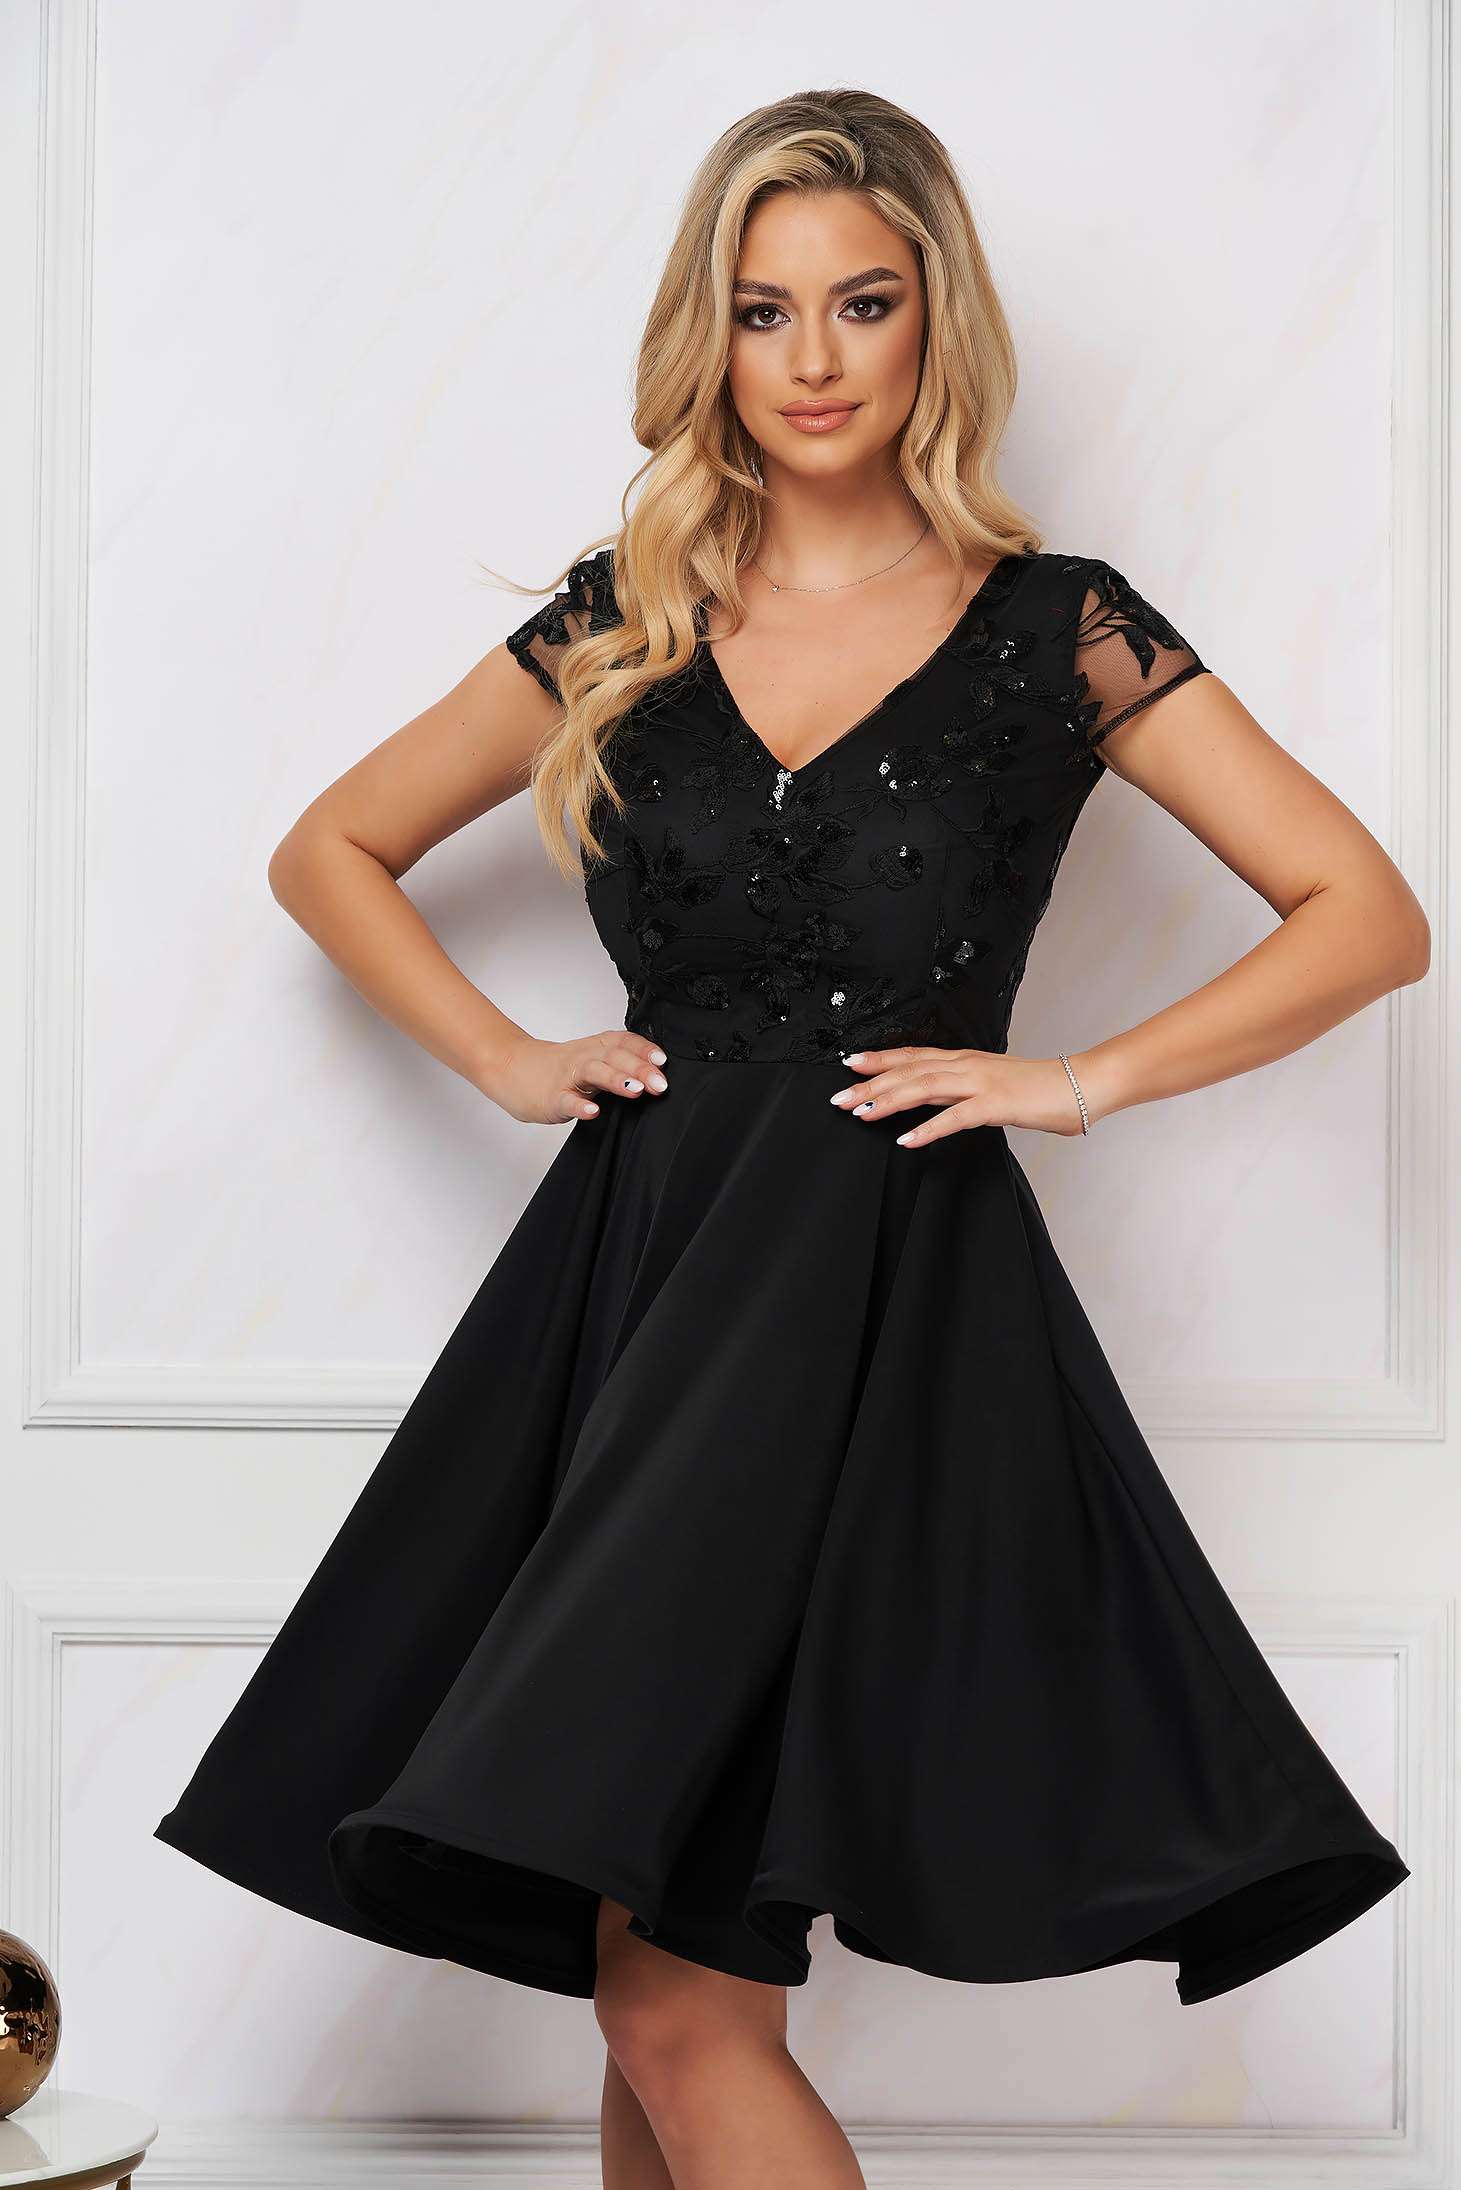 Occasional StarShinerS black cloche dress from satin fabric texture with sequin embellished details